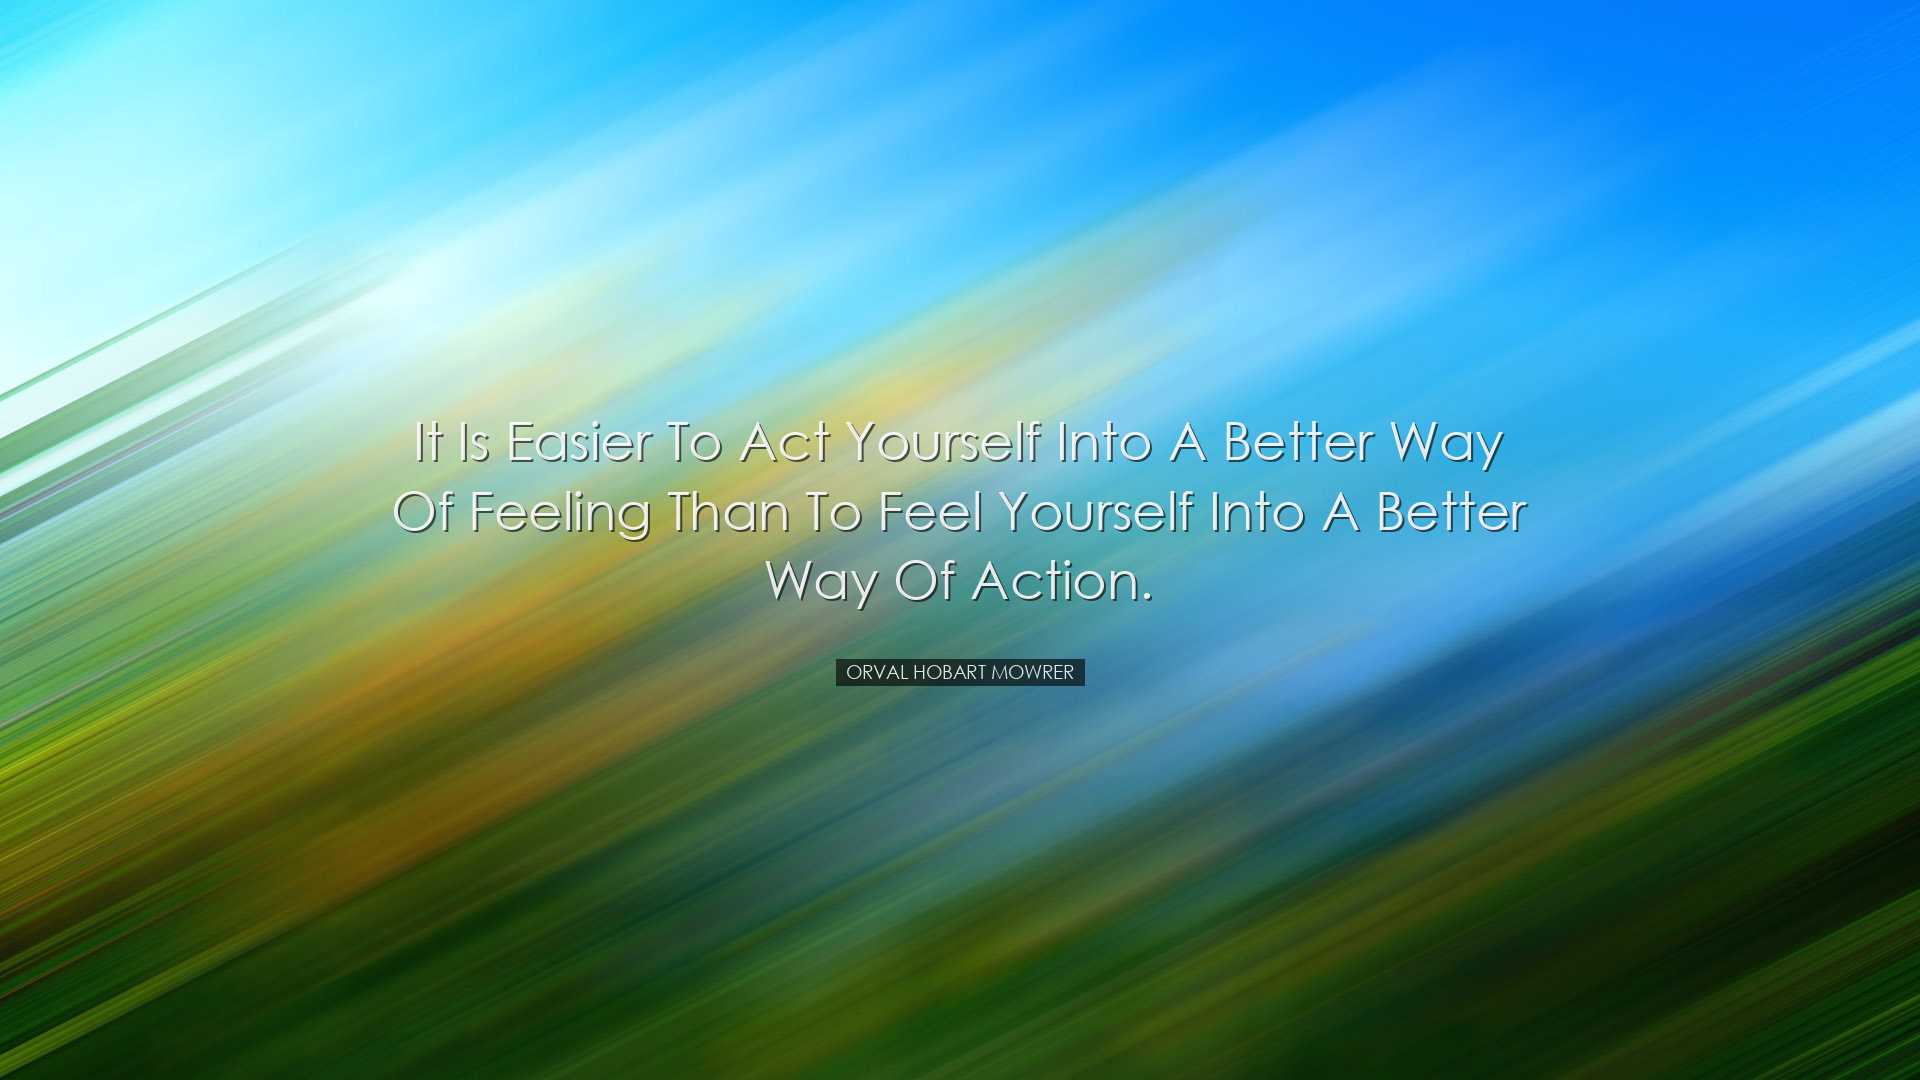 It is easier to act yourself into a better way of feeling than to